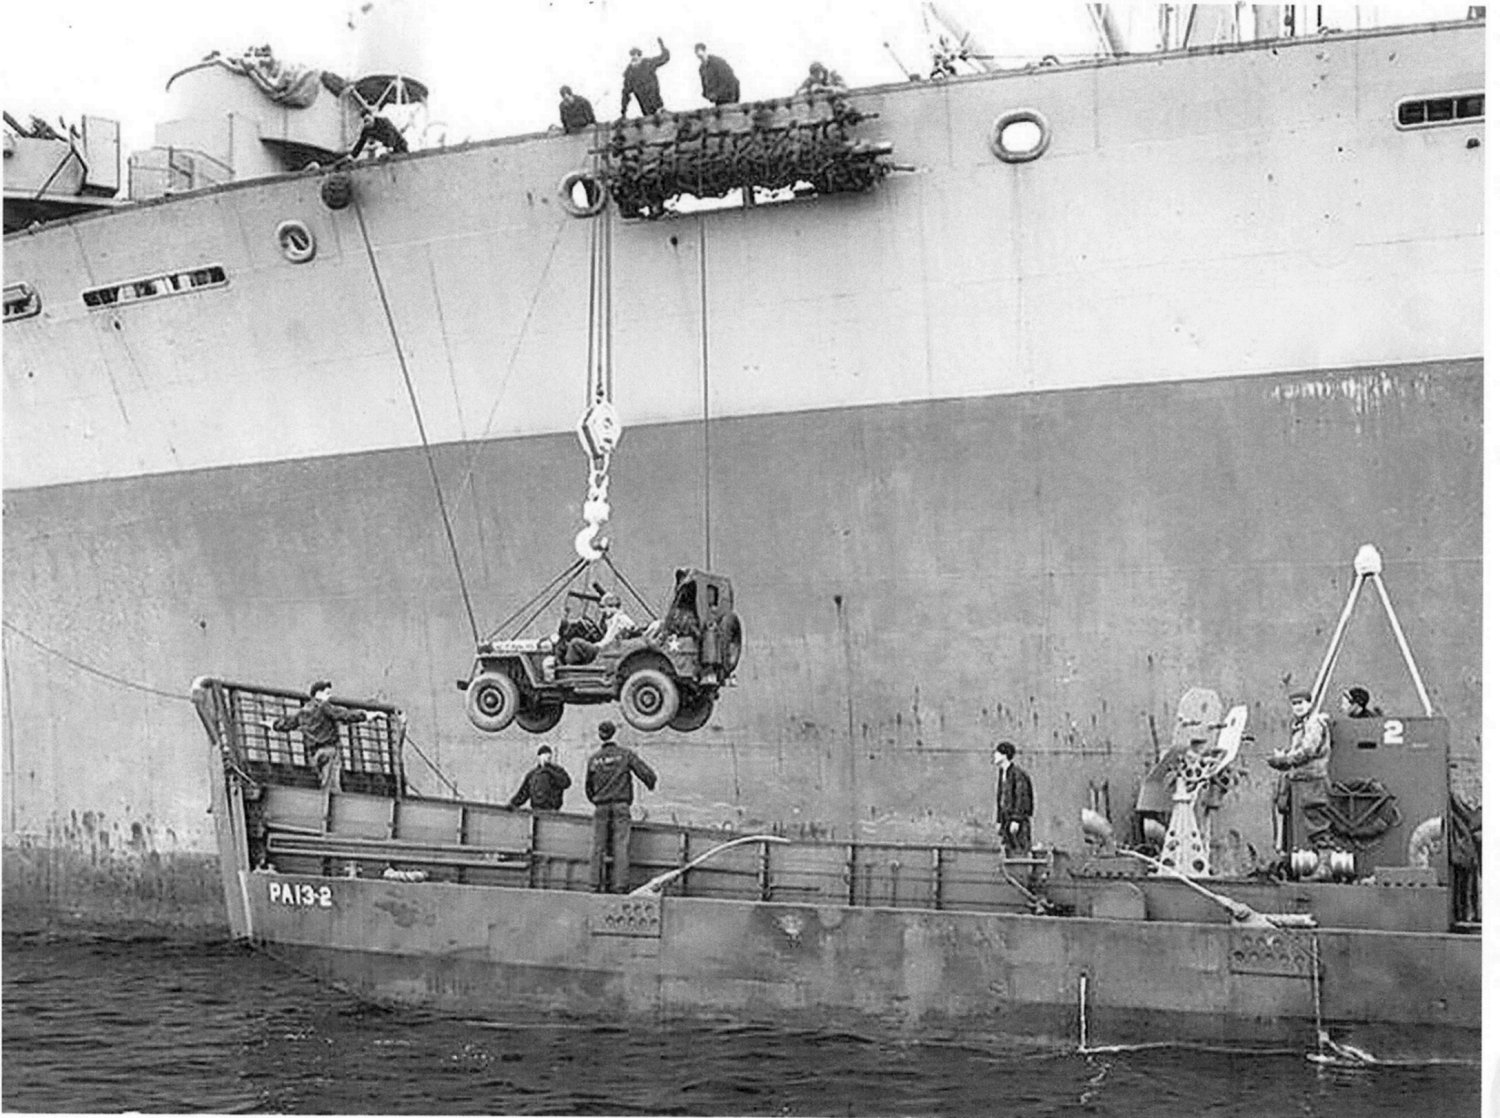 A Jeep being lowered into an LCM from Attack Transport USS Joseph T. Dickman (APA-13 – former SS President Roosevelt), manned by USCG personnel off Normandy, June 1944. Photo 2 of 2